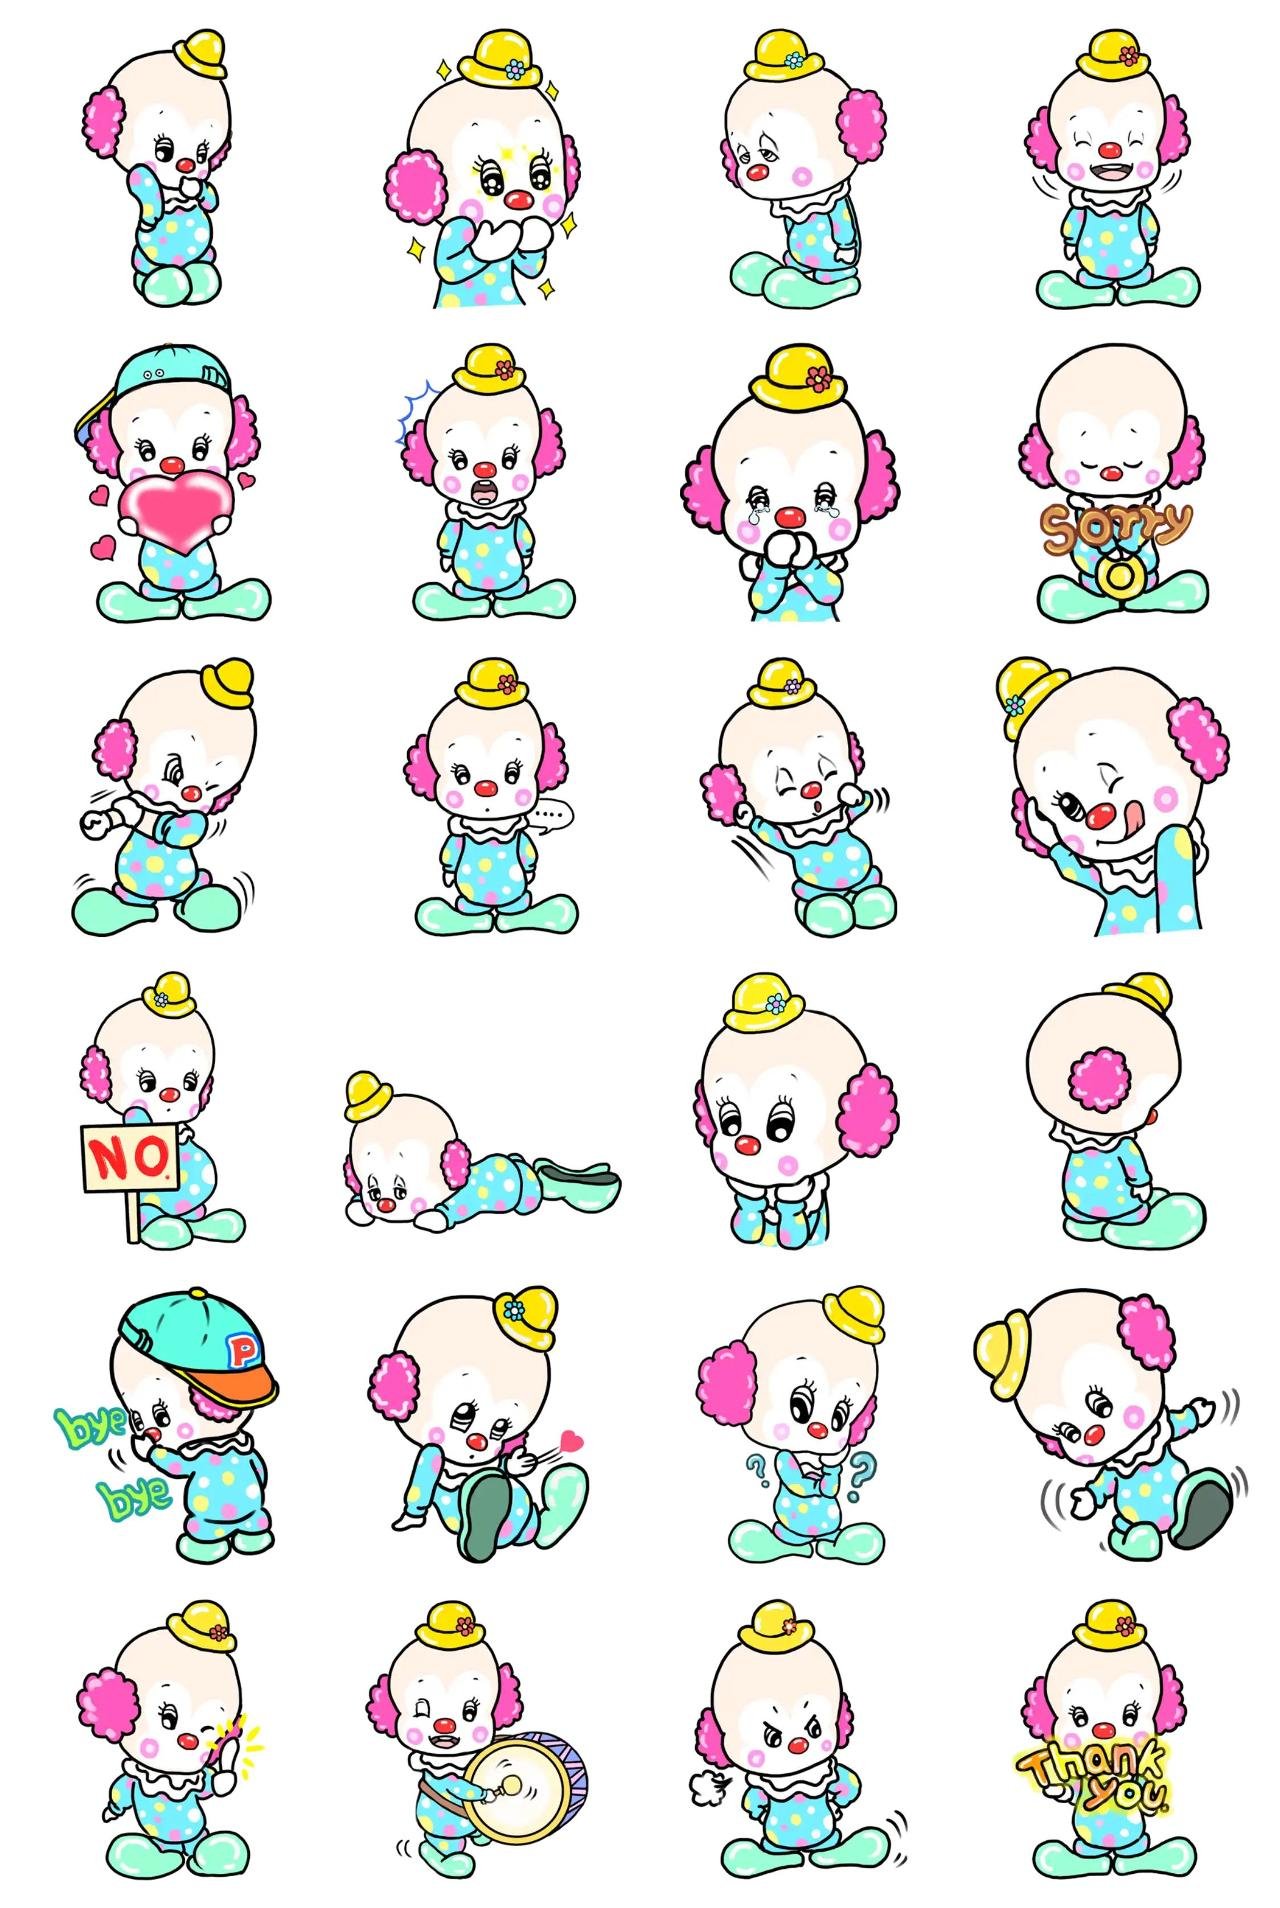 Little Piero Pongky People sticker pack for Whatsapp, Telegram, Signal, and others chatting and message apps